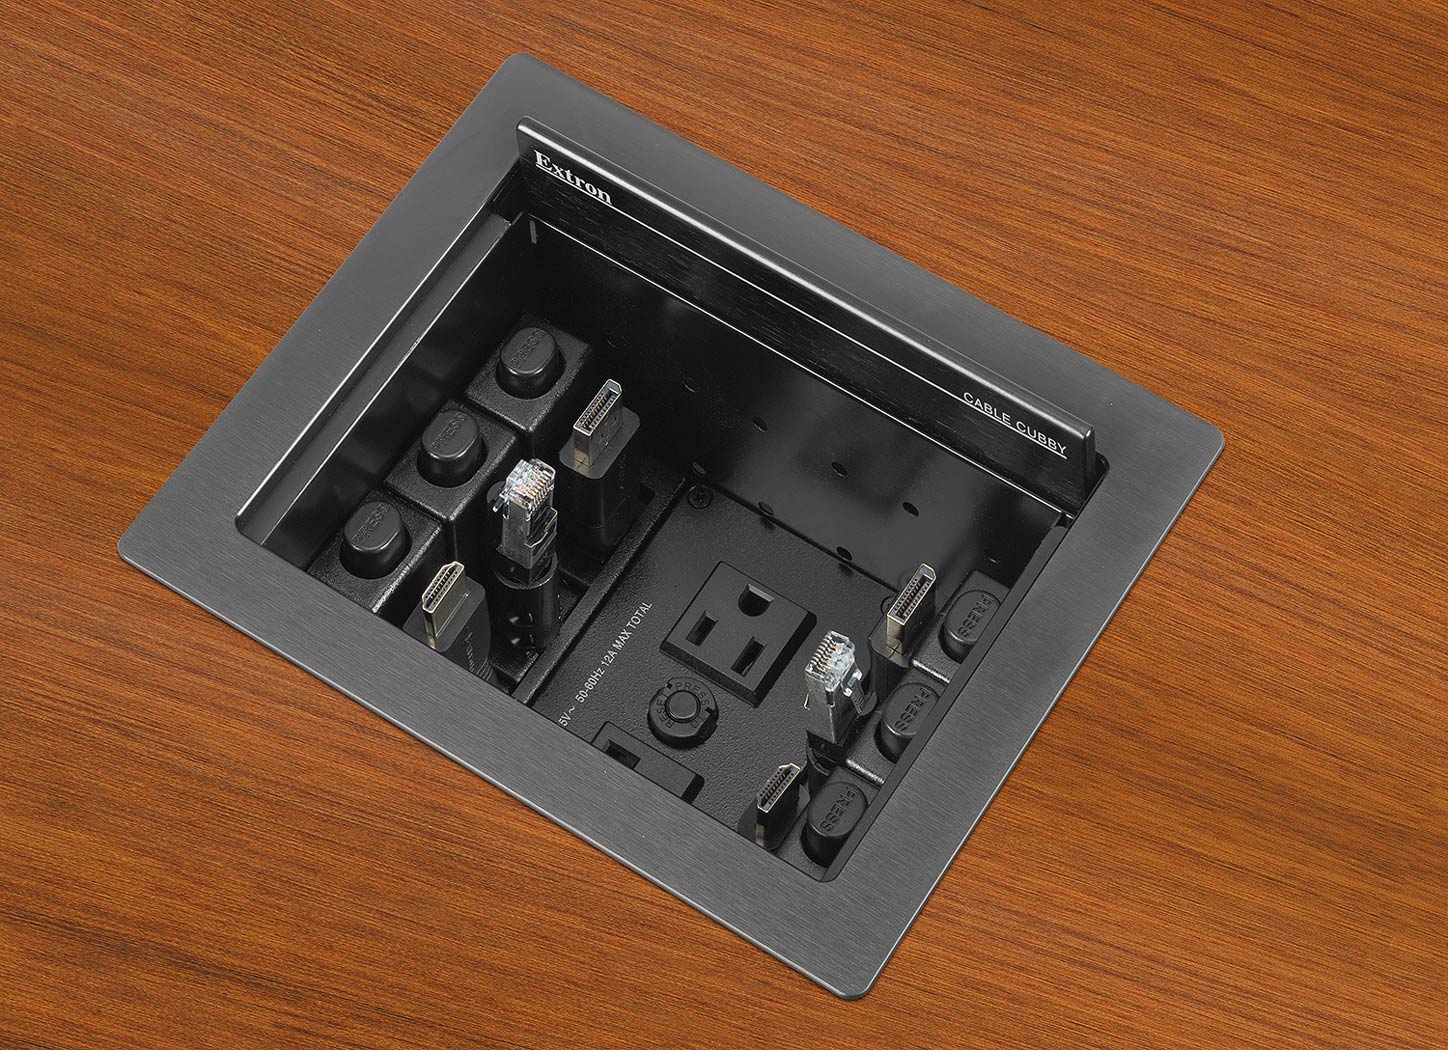 Cable Cubby 700 complements installations in high end conference rooms and board rooms